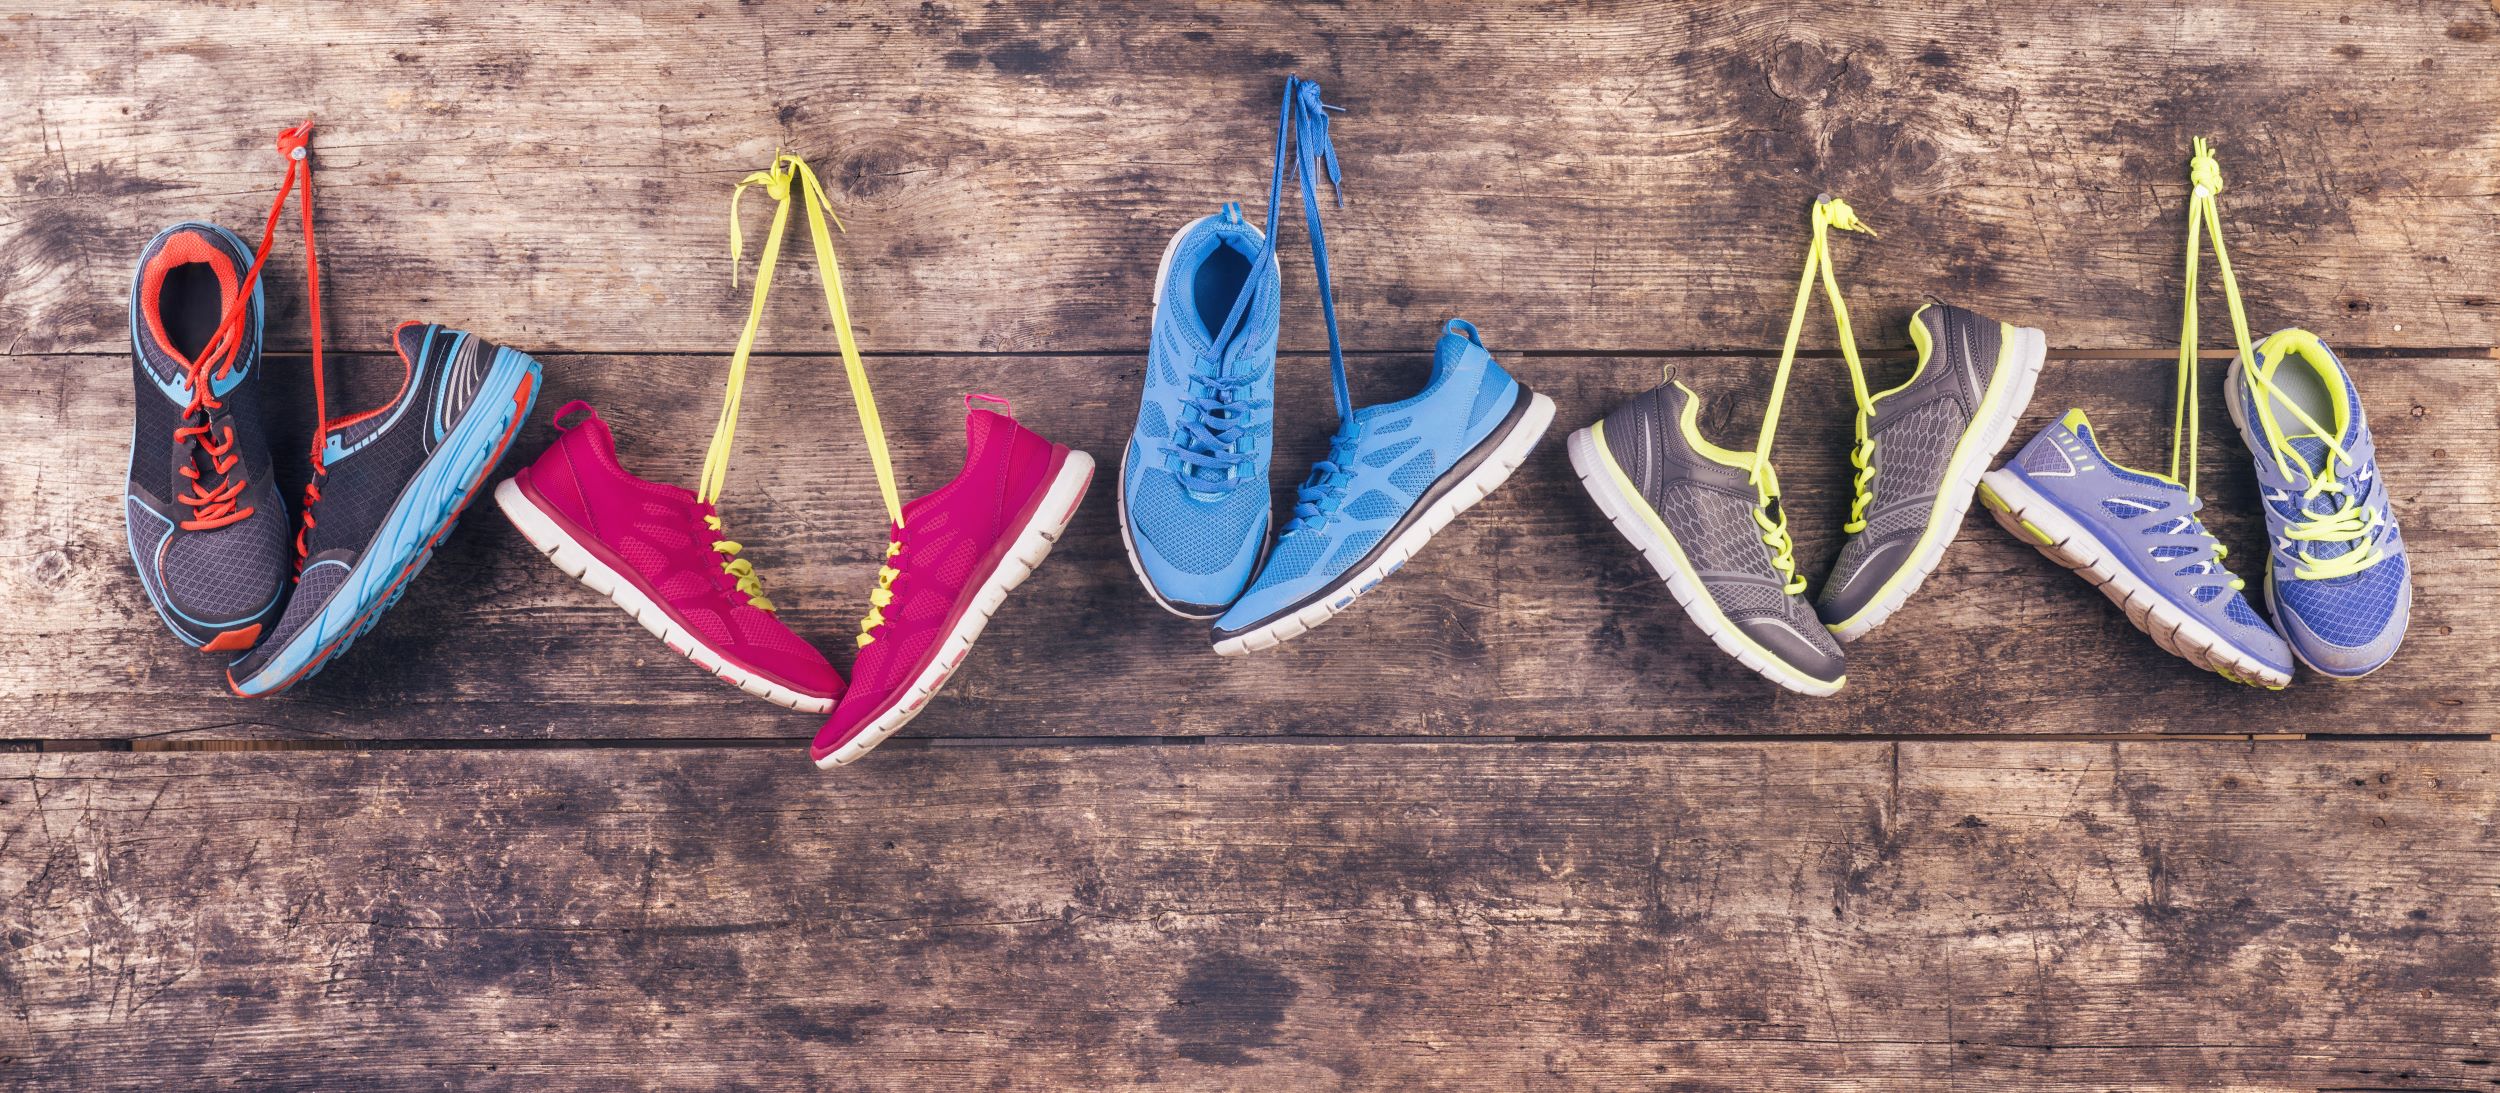 Colorful running shoes hanging on a wooden background.